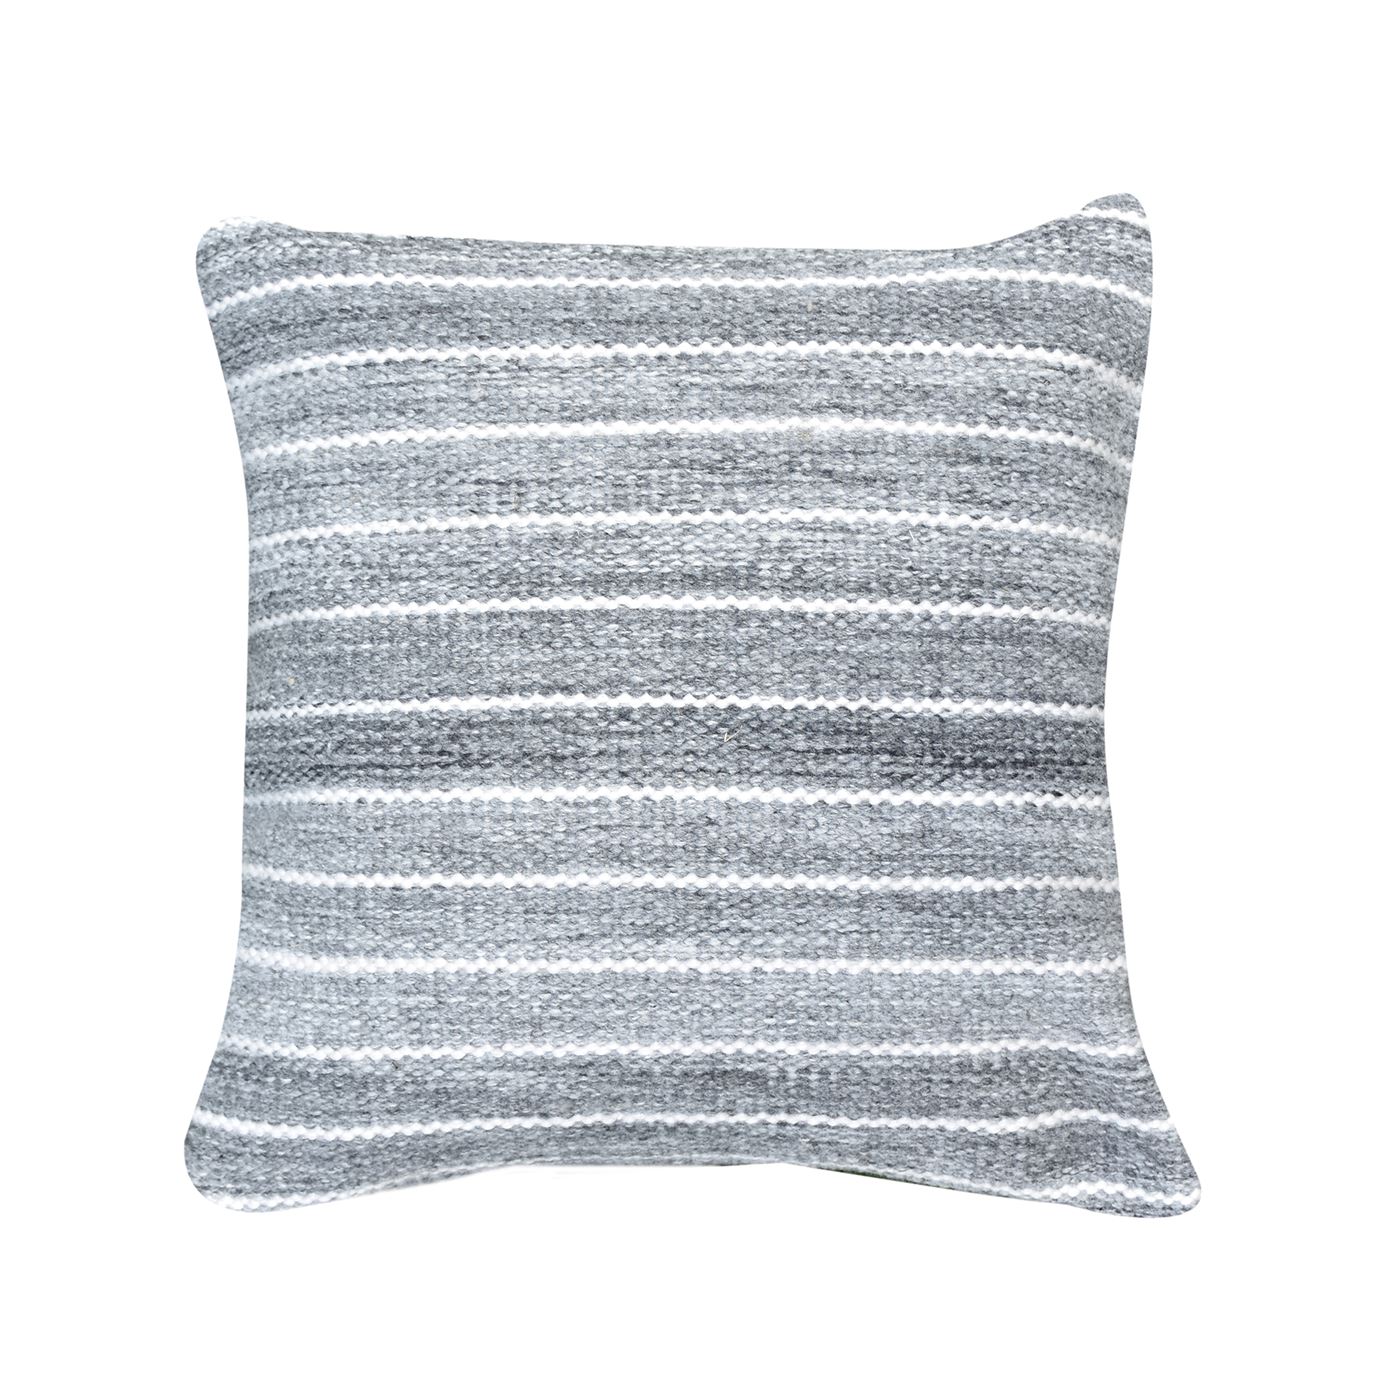 Sion Pillow, Pet, Grey, Pitloom, Flat Weave